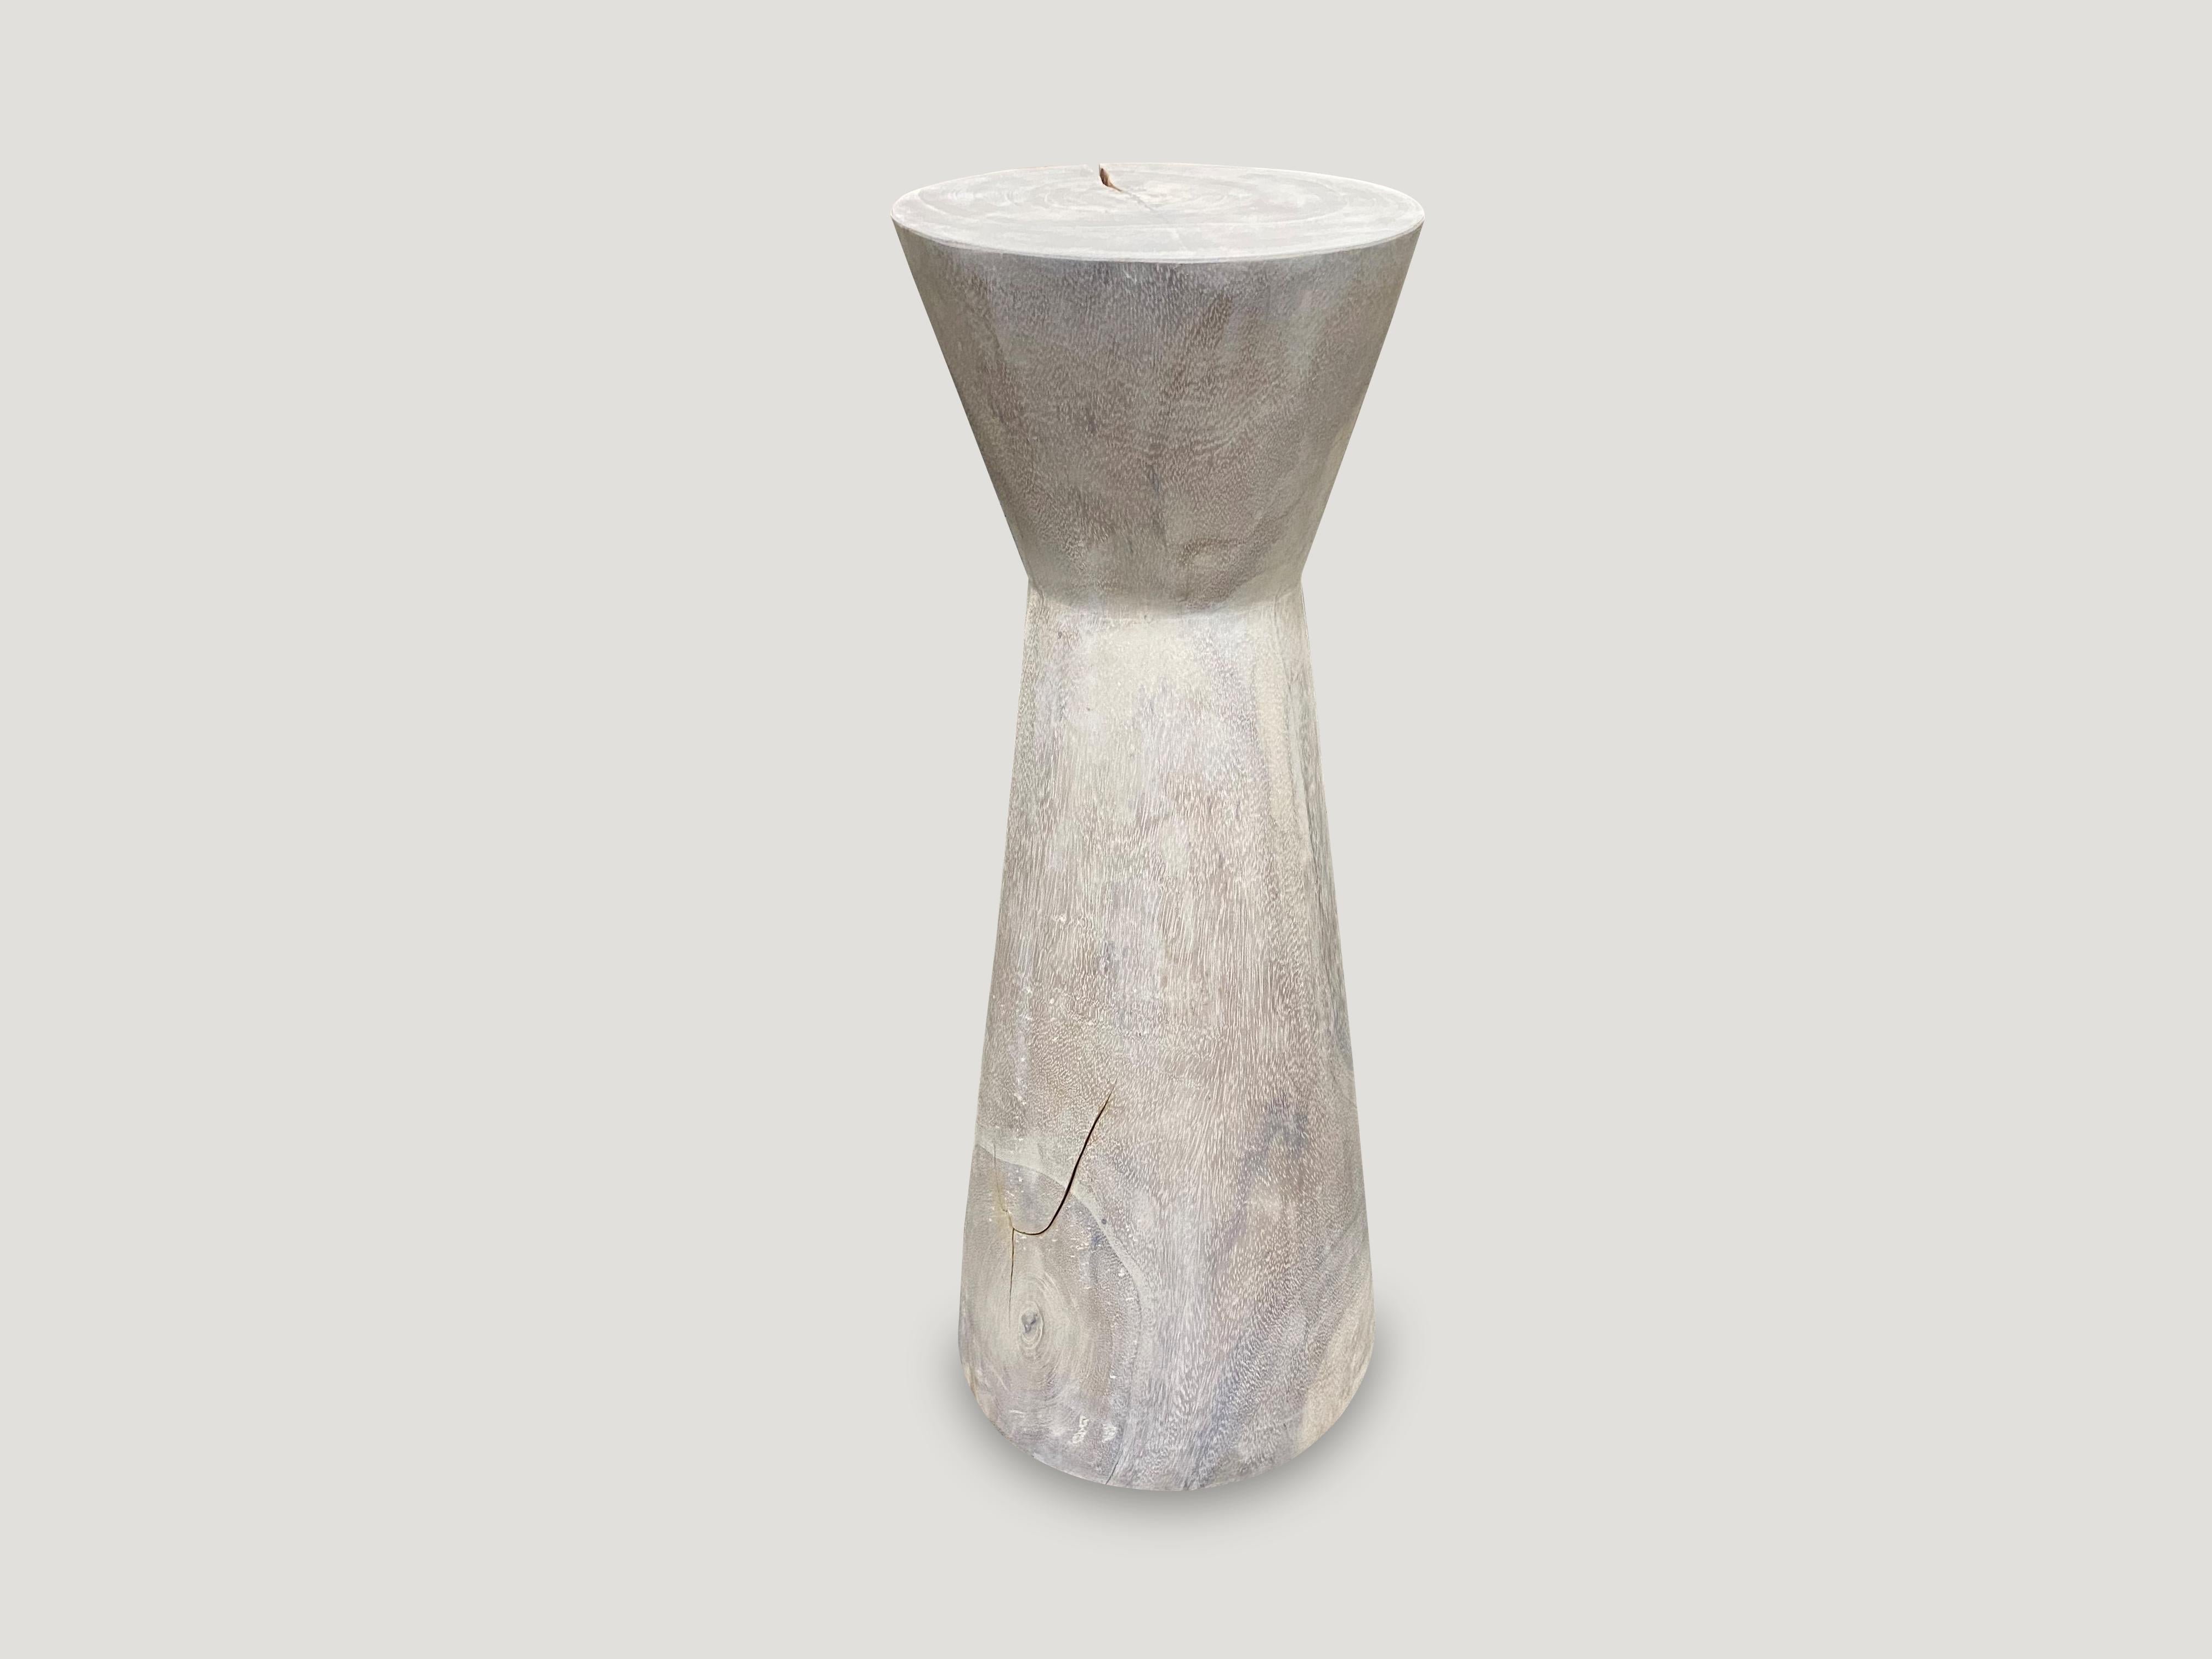 Beautiful hourglass tall side table made from solid suar wood. The bottom is 11” diameter and the top 9.5” diameter. The price reflects the one shown.

The St. Barts Collection features an exciting new line of organic white wash, bleached and